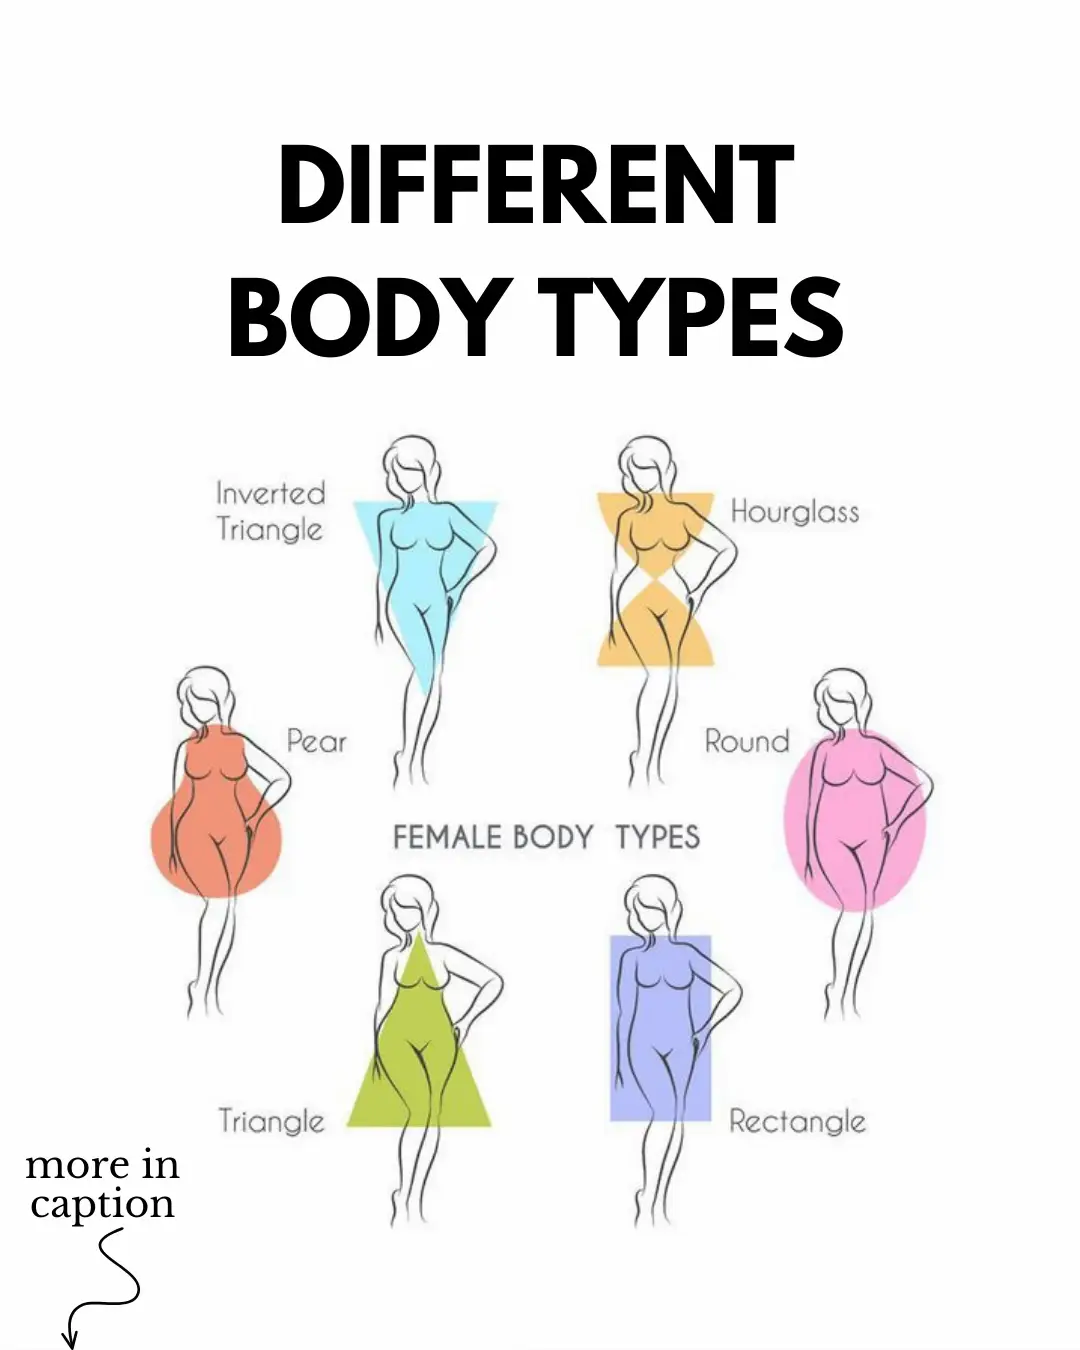 How to dress for your body type  Gallery posted by Leahmariaa